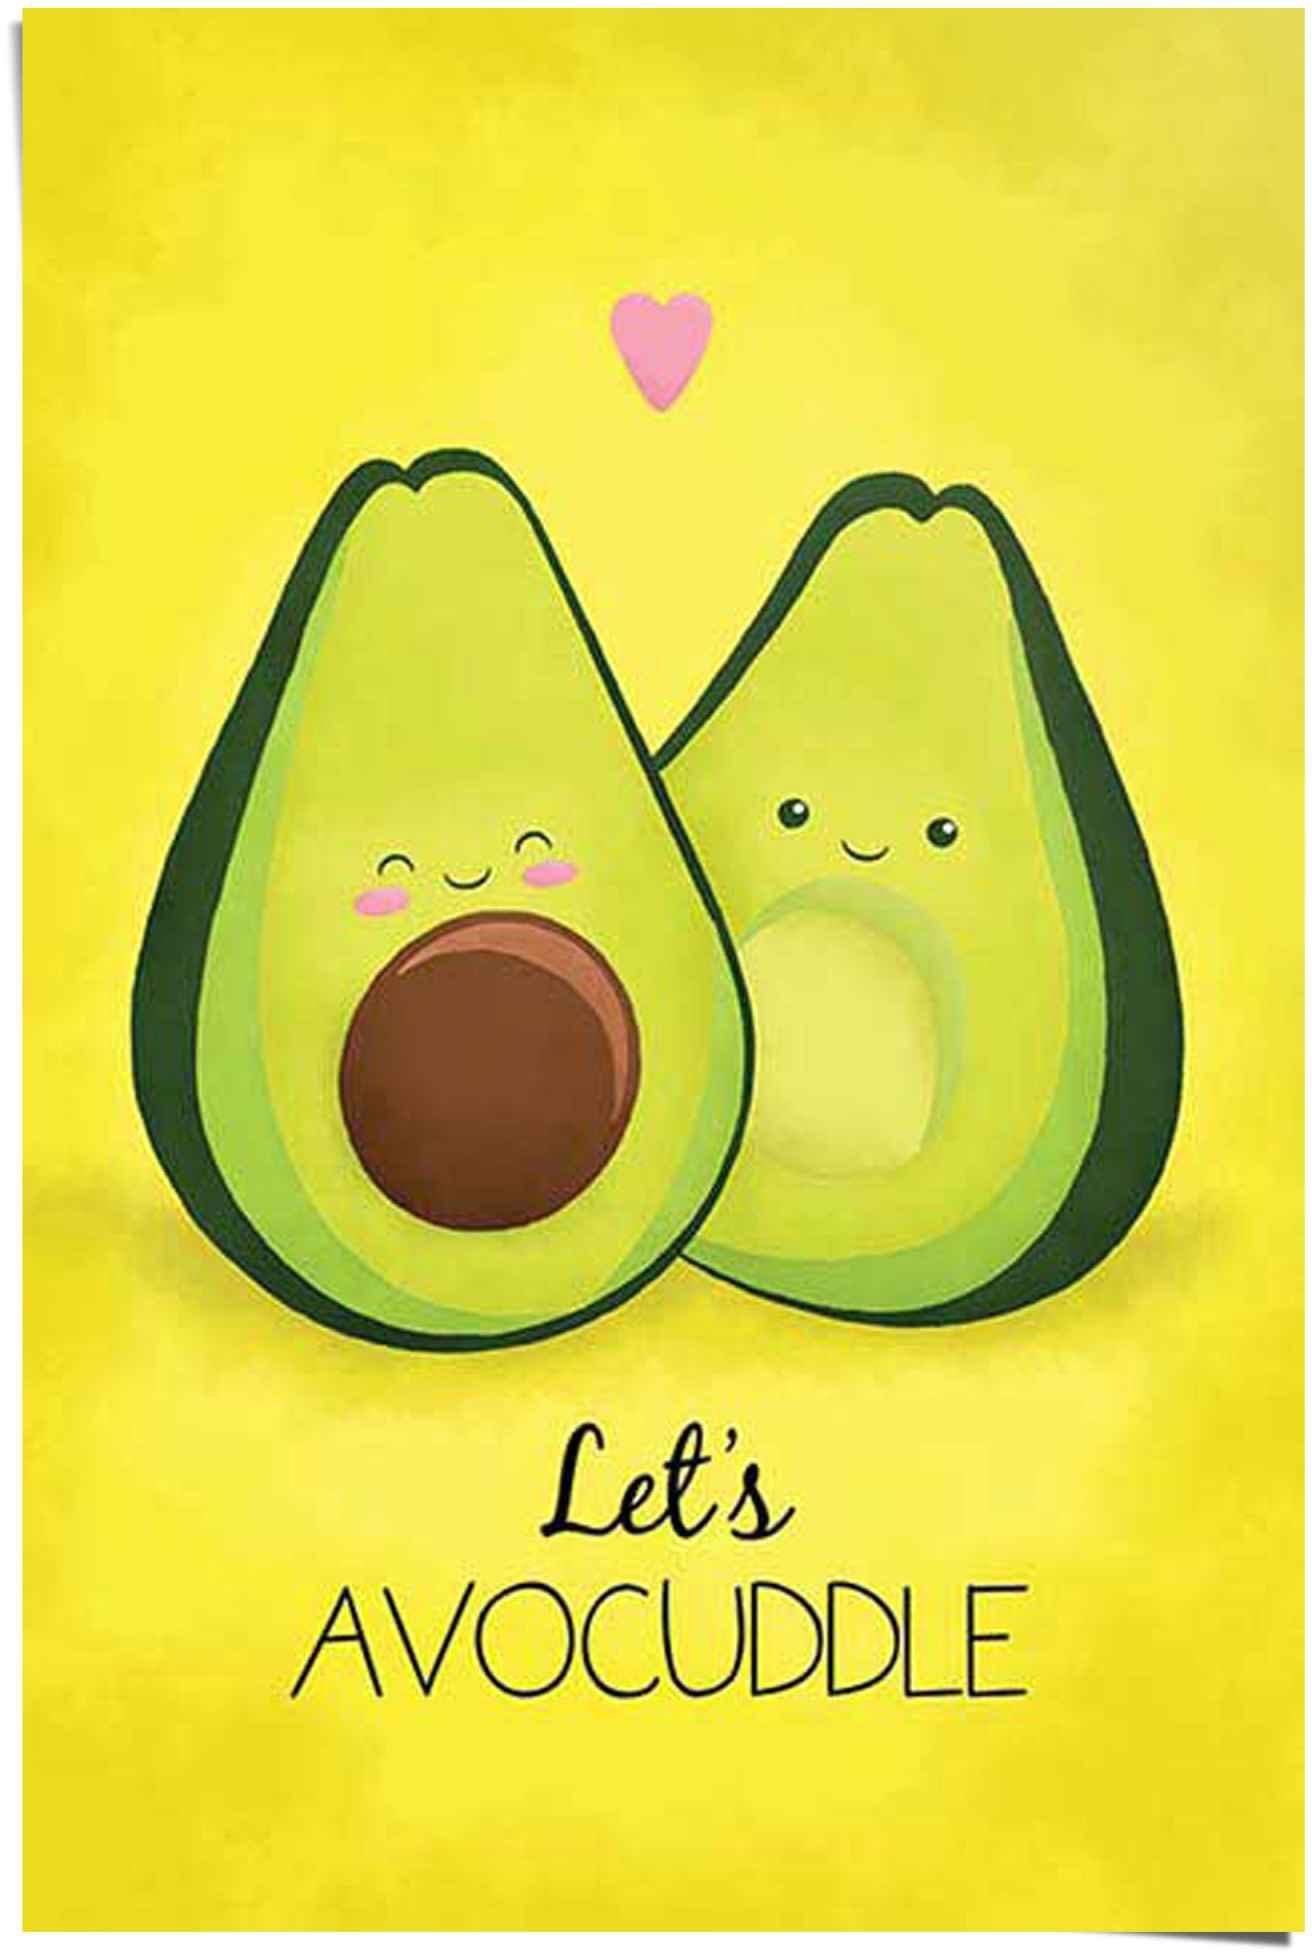 let´s Poster St) Reinders! (1 Avocado avocuddle,